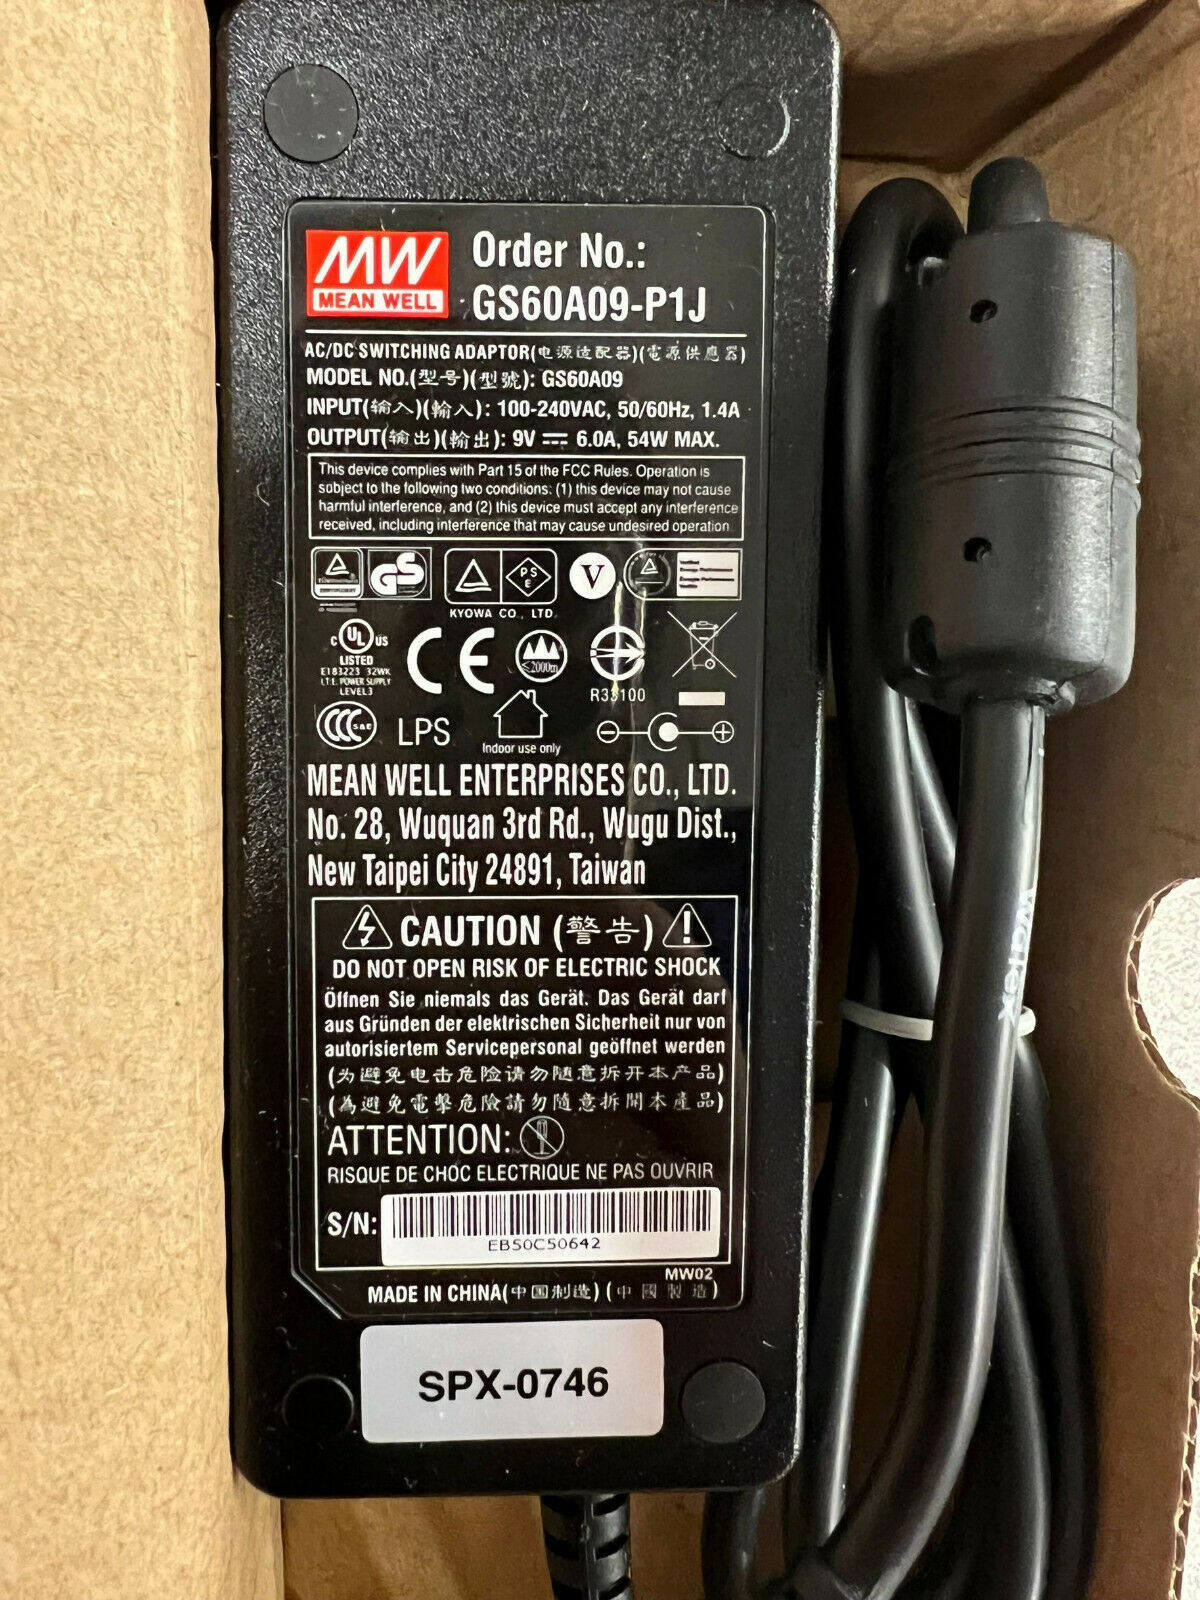 *Brand NEW*9V 6A 54W AC Adapter MW Mean Well GS60A09-P1J Power Supply Cord Charger